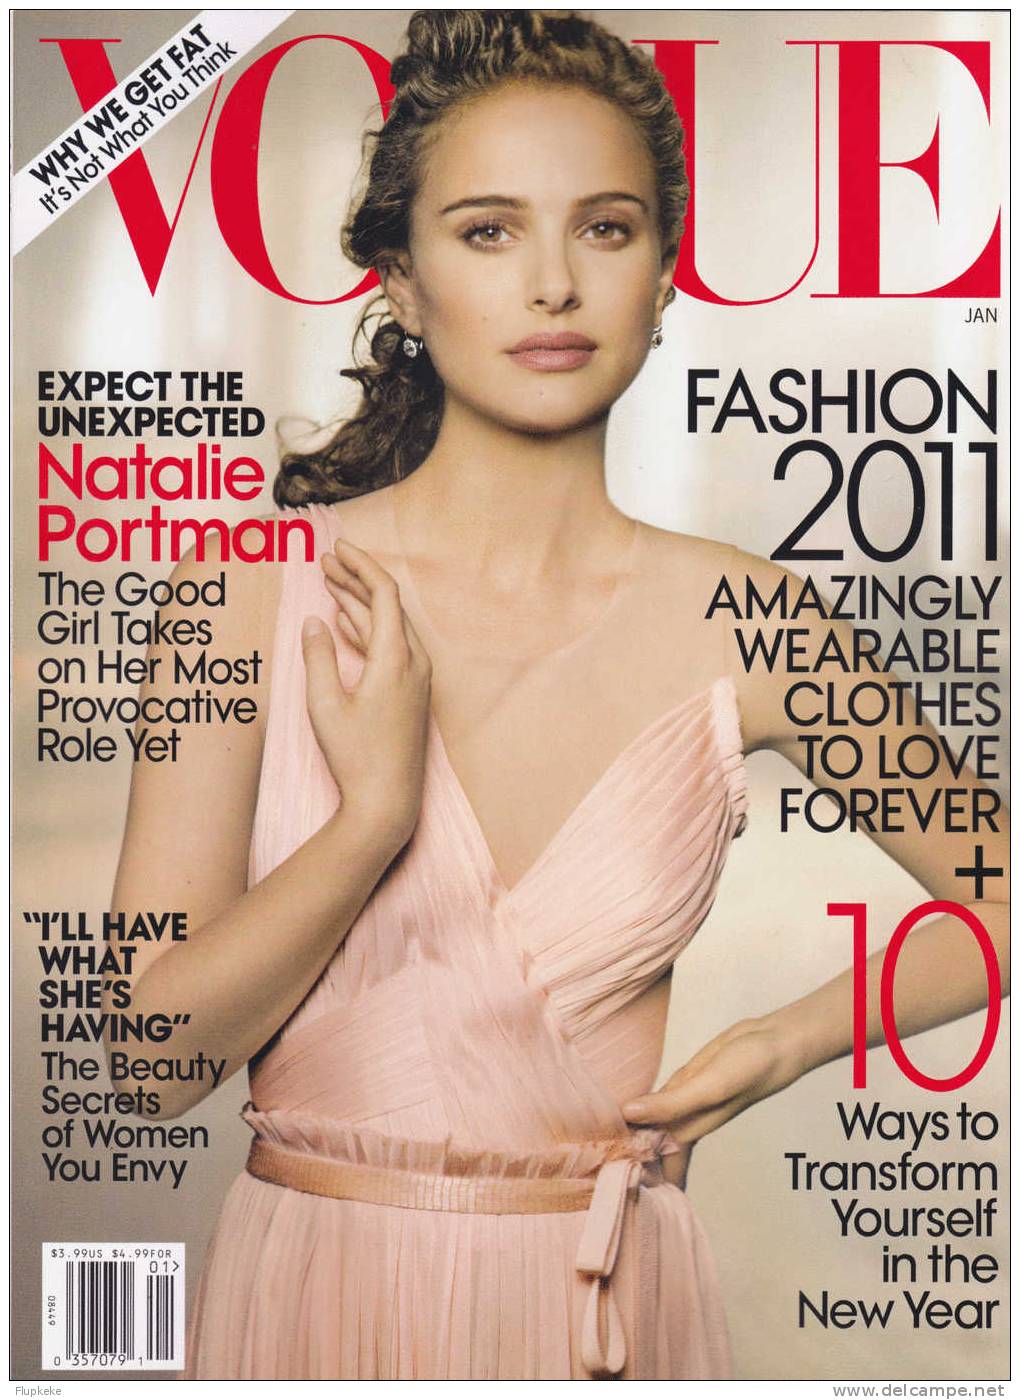 Vogue January 2011 Cover Natalie Portman Expect The Unexpected The Good Girl Takes On Her Most Provocative Role Yet - Divertimento